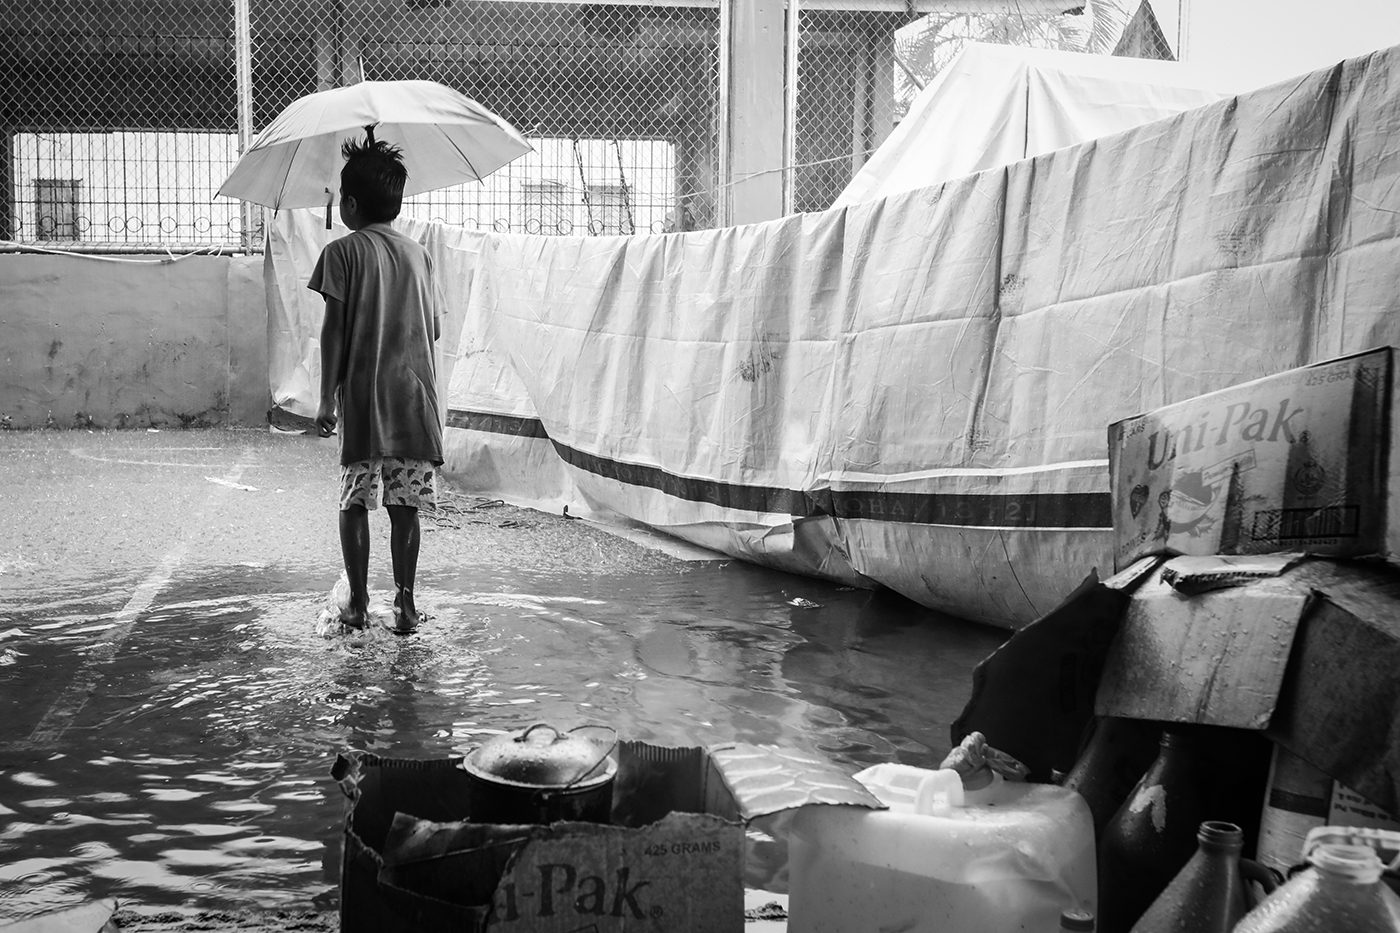 Lack of proper shelter in Saguiaran in the early days in evacuation camps means additional burden for the displaced families during downpours.